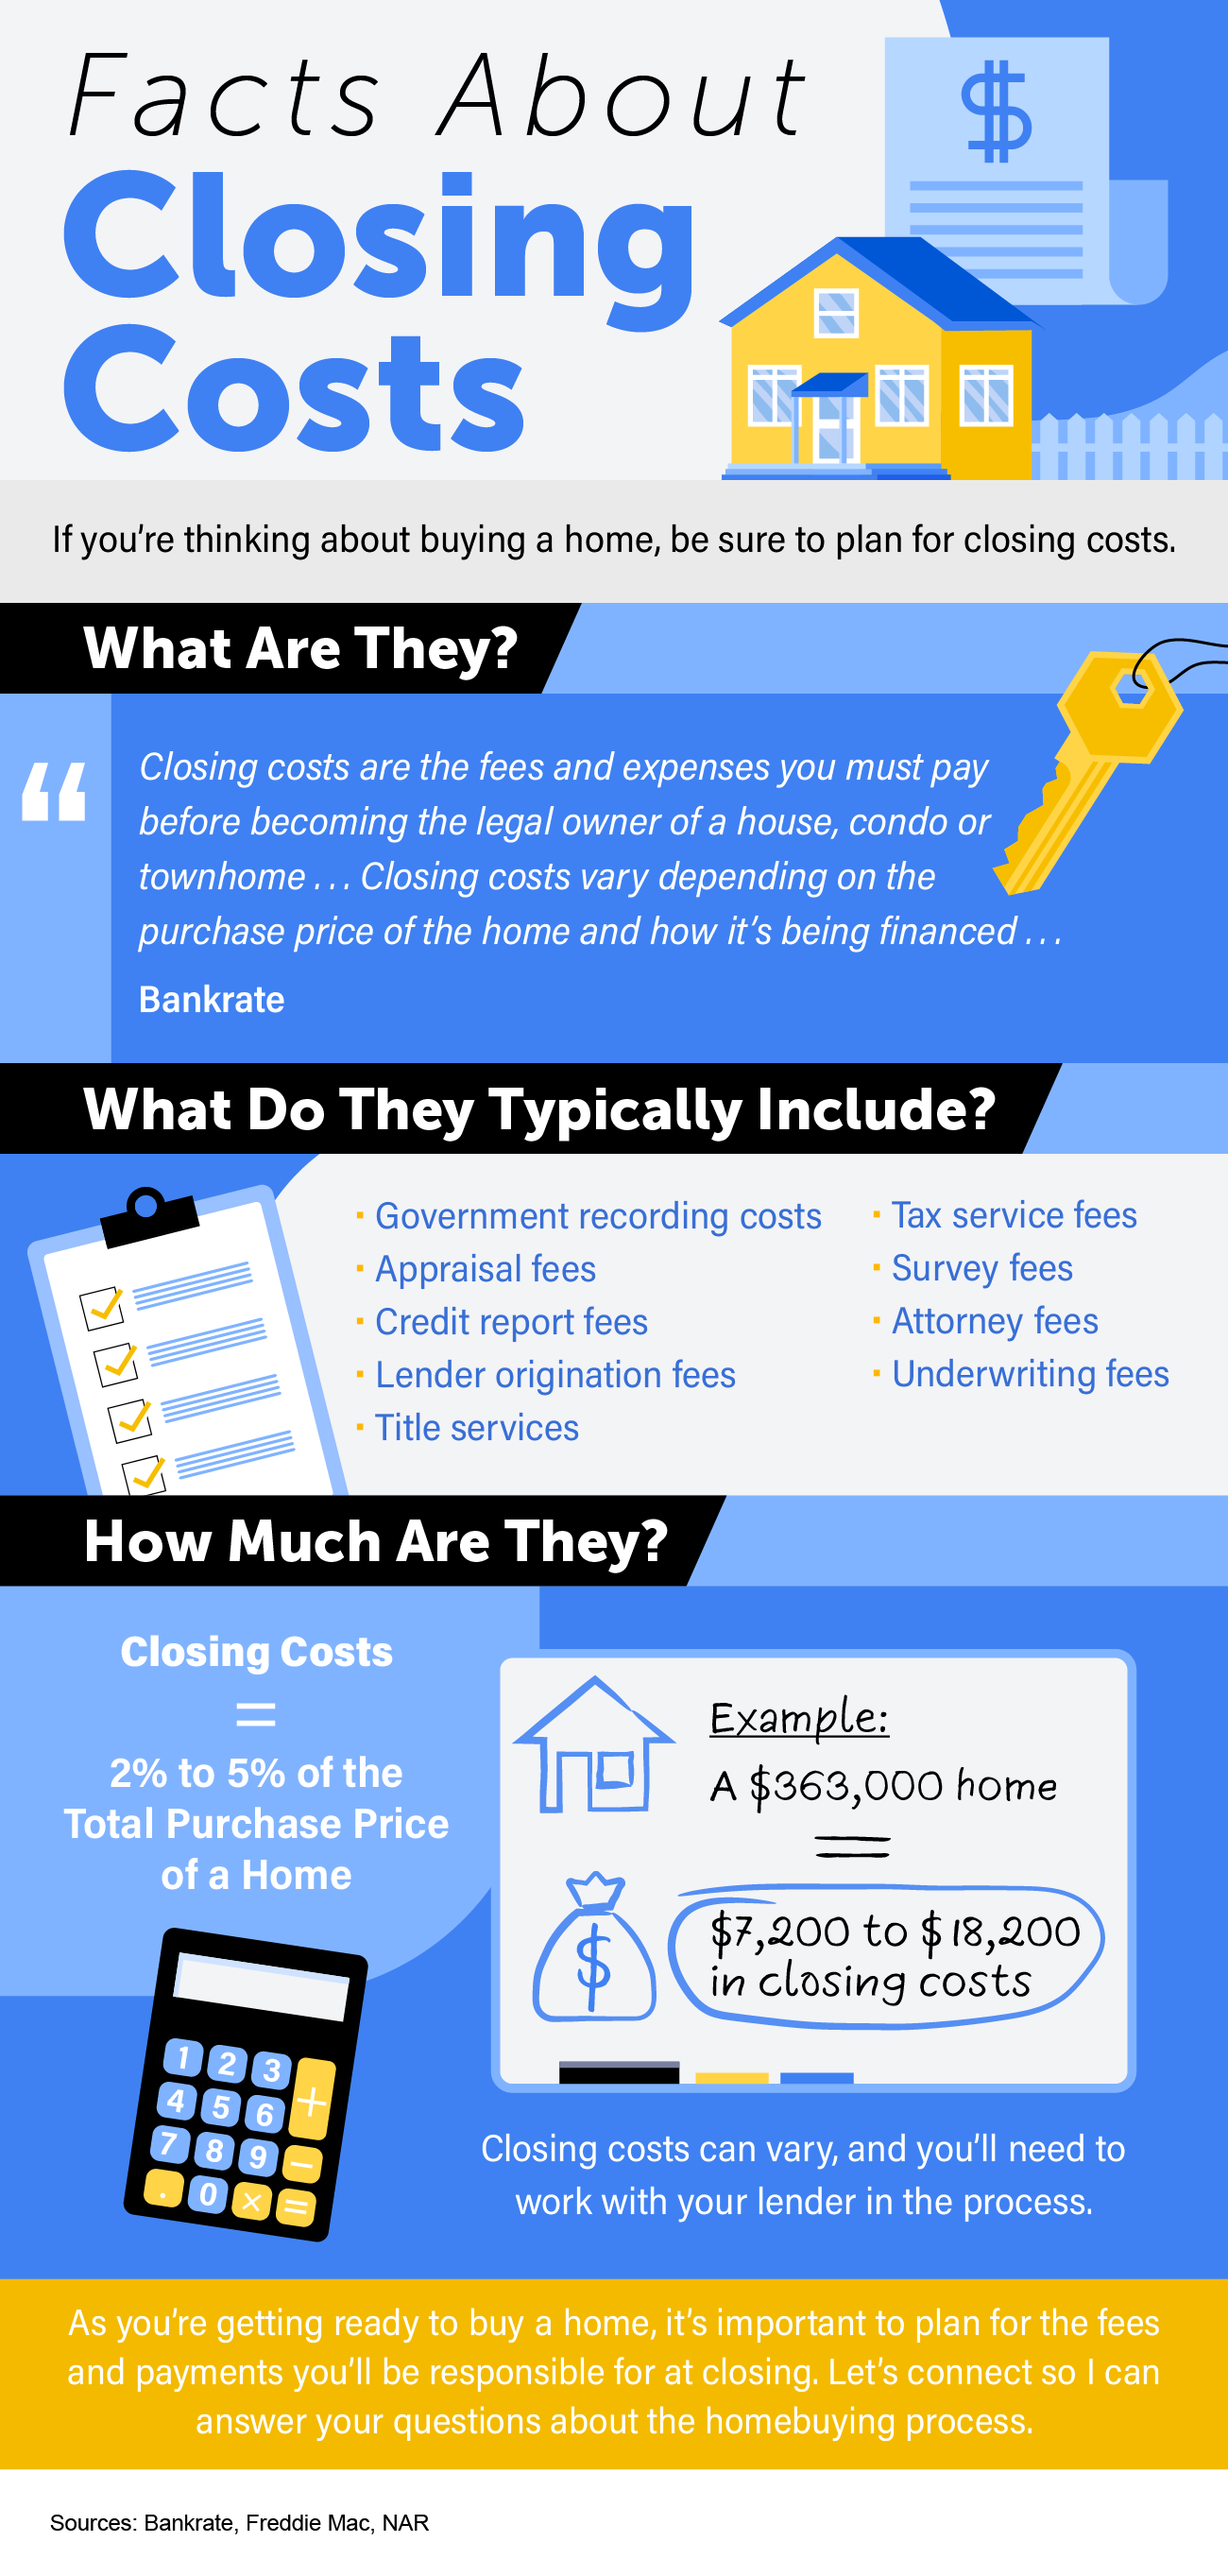 Facts About Closing Costs [INFOGRAPHIC]